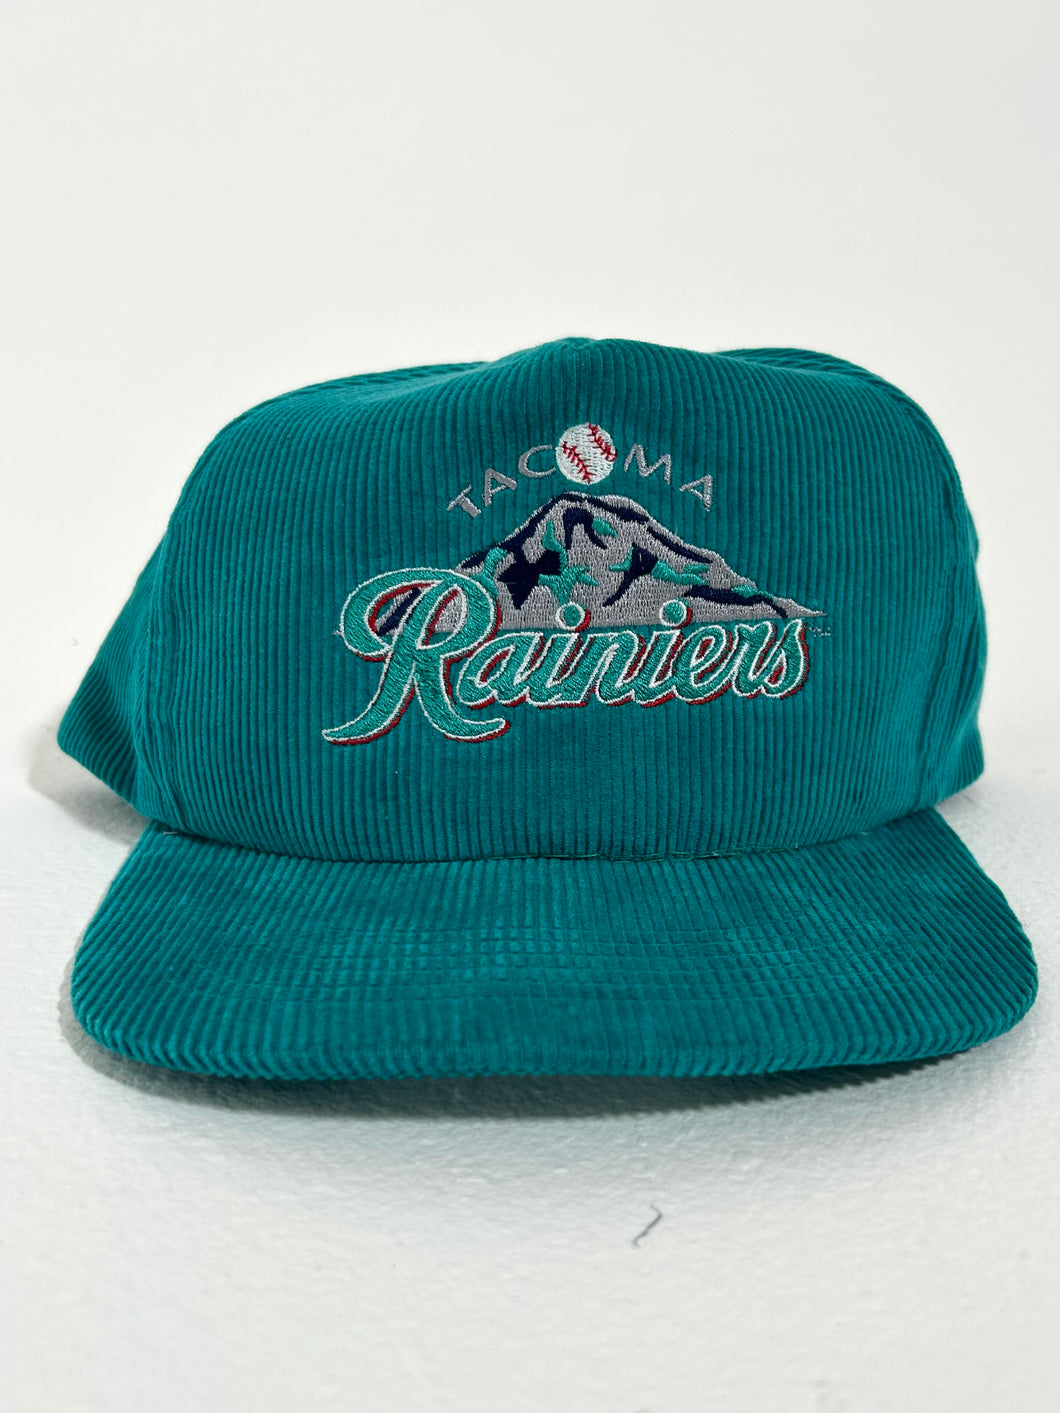 Vintage Tacoma Rainiers AAA Baseball Hat Cap for Sale in Gig